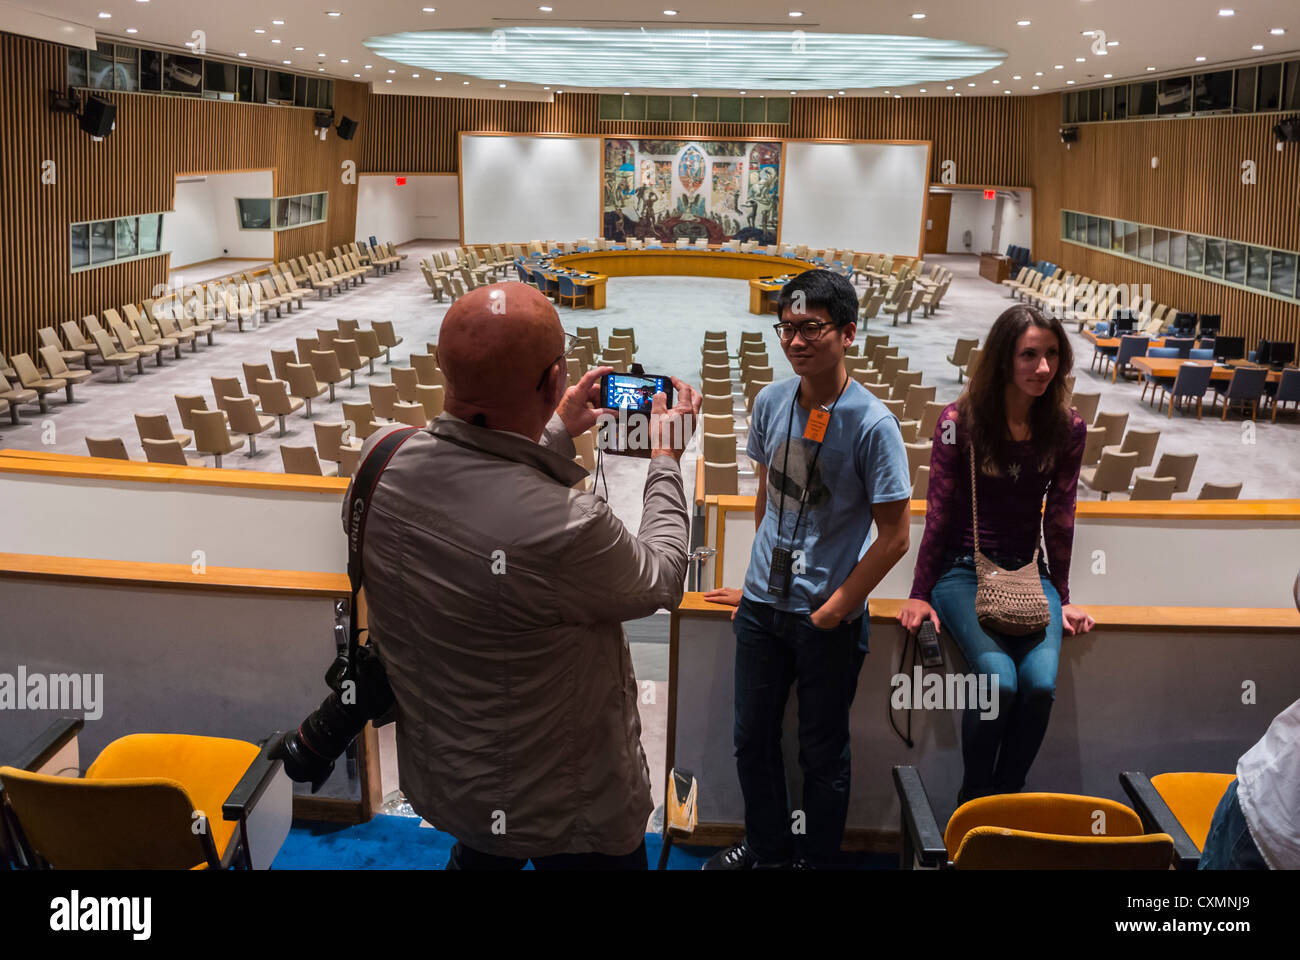 New York, Tourists Visiting U.N. United Nations Building, Manhattan, Security Council Meeting Room, Interior Stock Photo